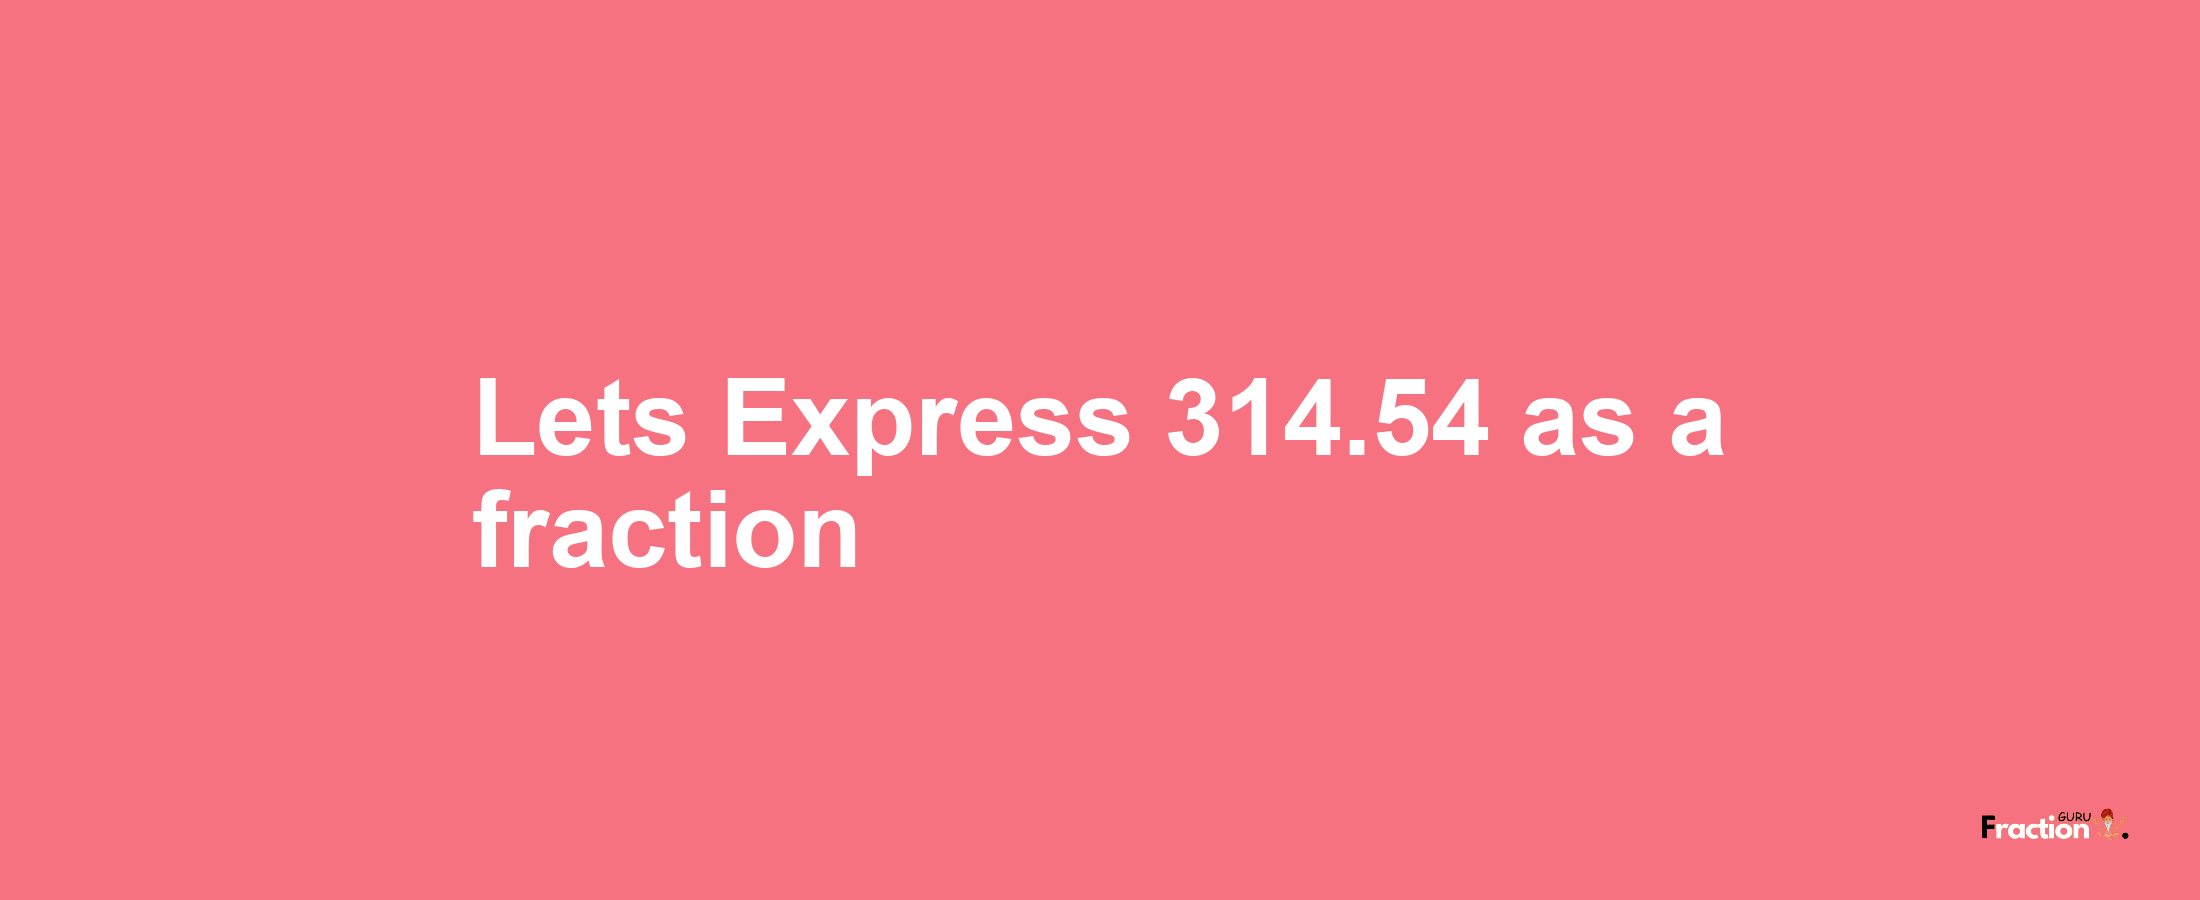 Lets Express 314.54 as afraction